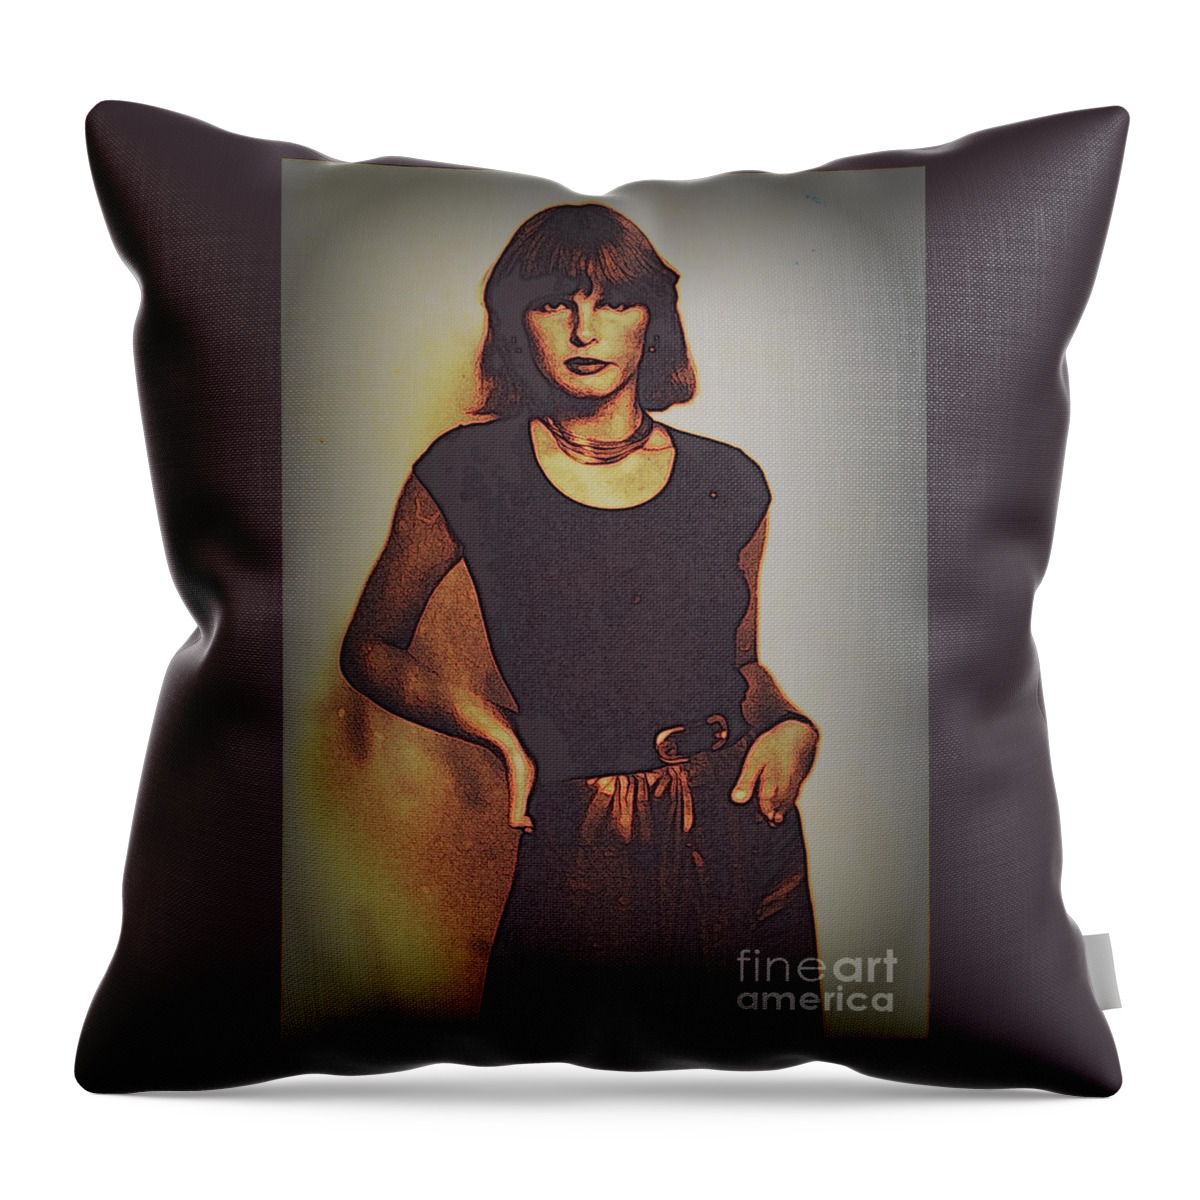 Woman Throw Pillow featuring the photograph Self Portrait 1 by Diane montana Jansson